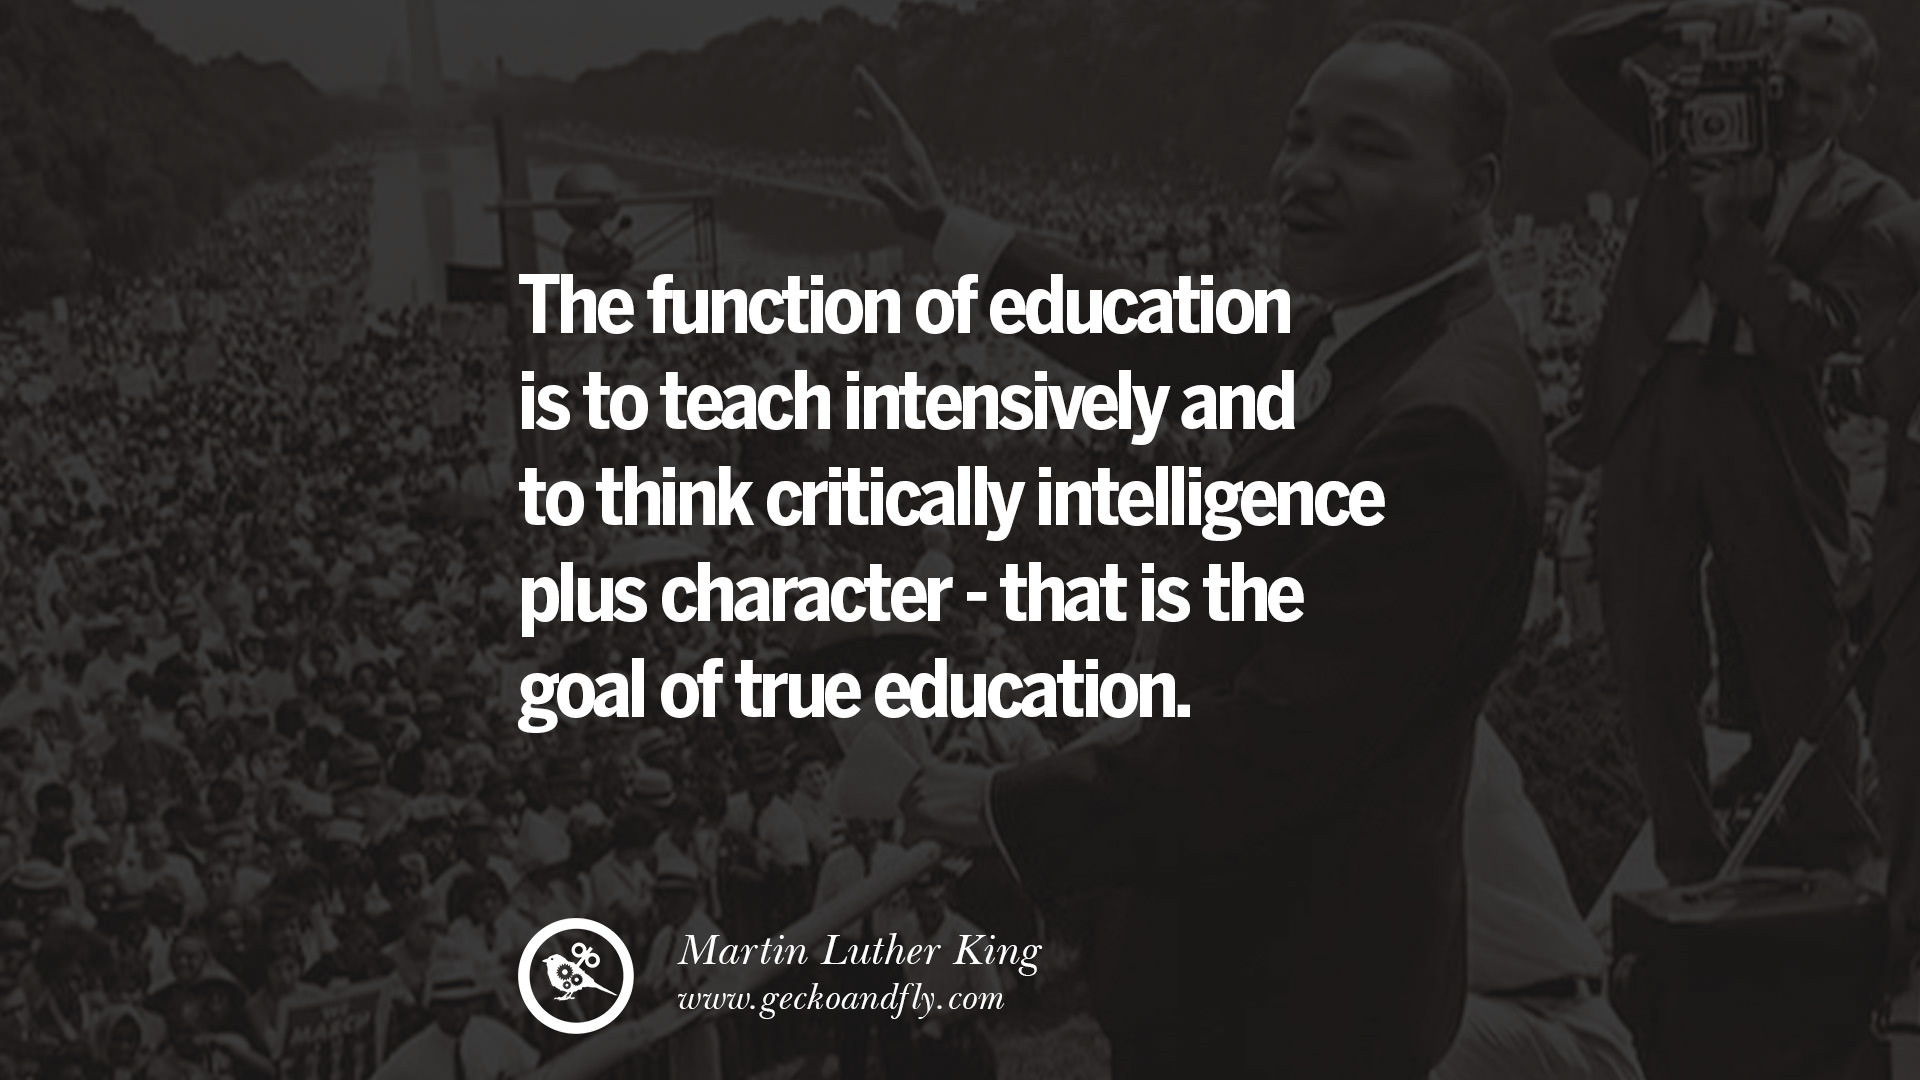 Martin Luther King Quotes On Education
 30 Powerful Martin Luther King Jr Quotes on Equality